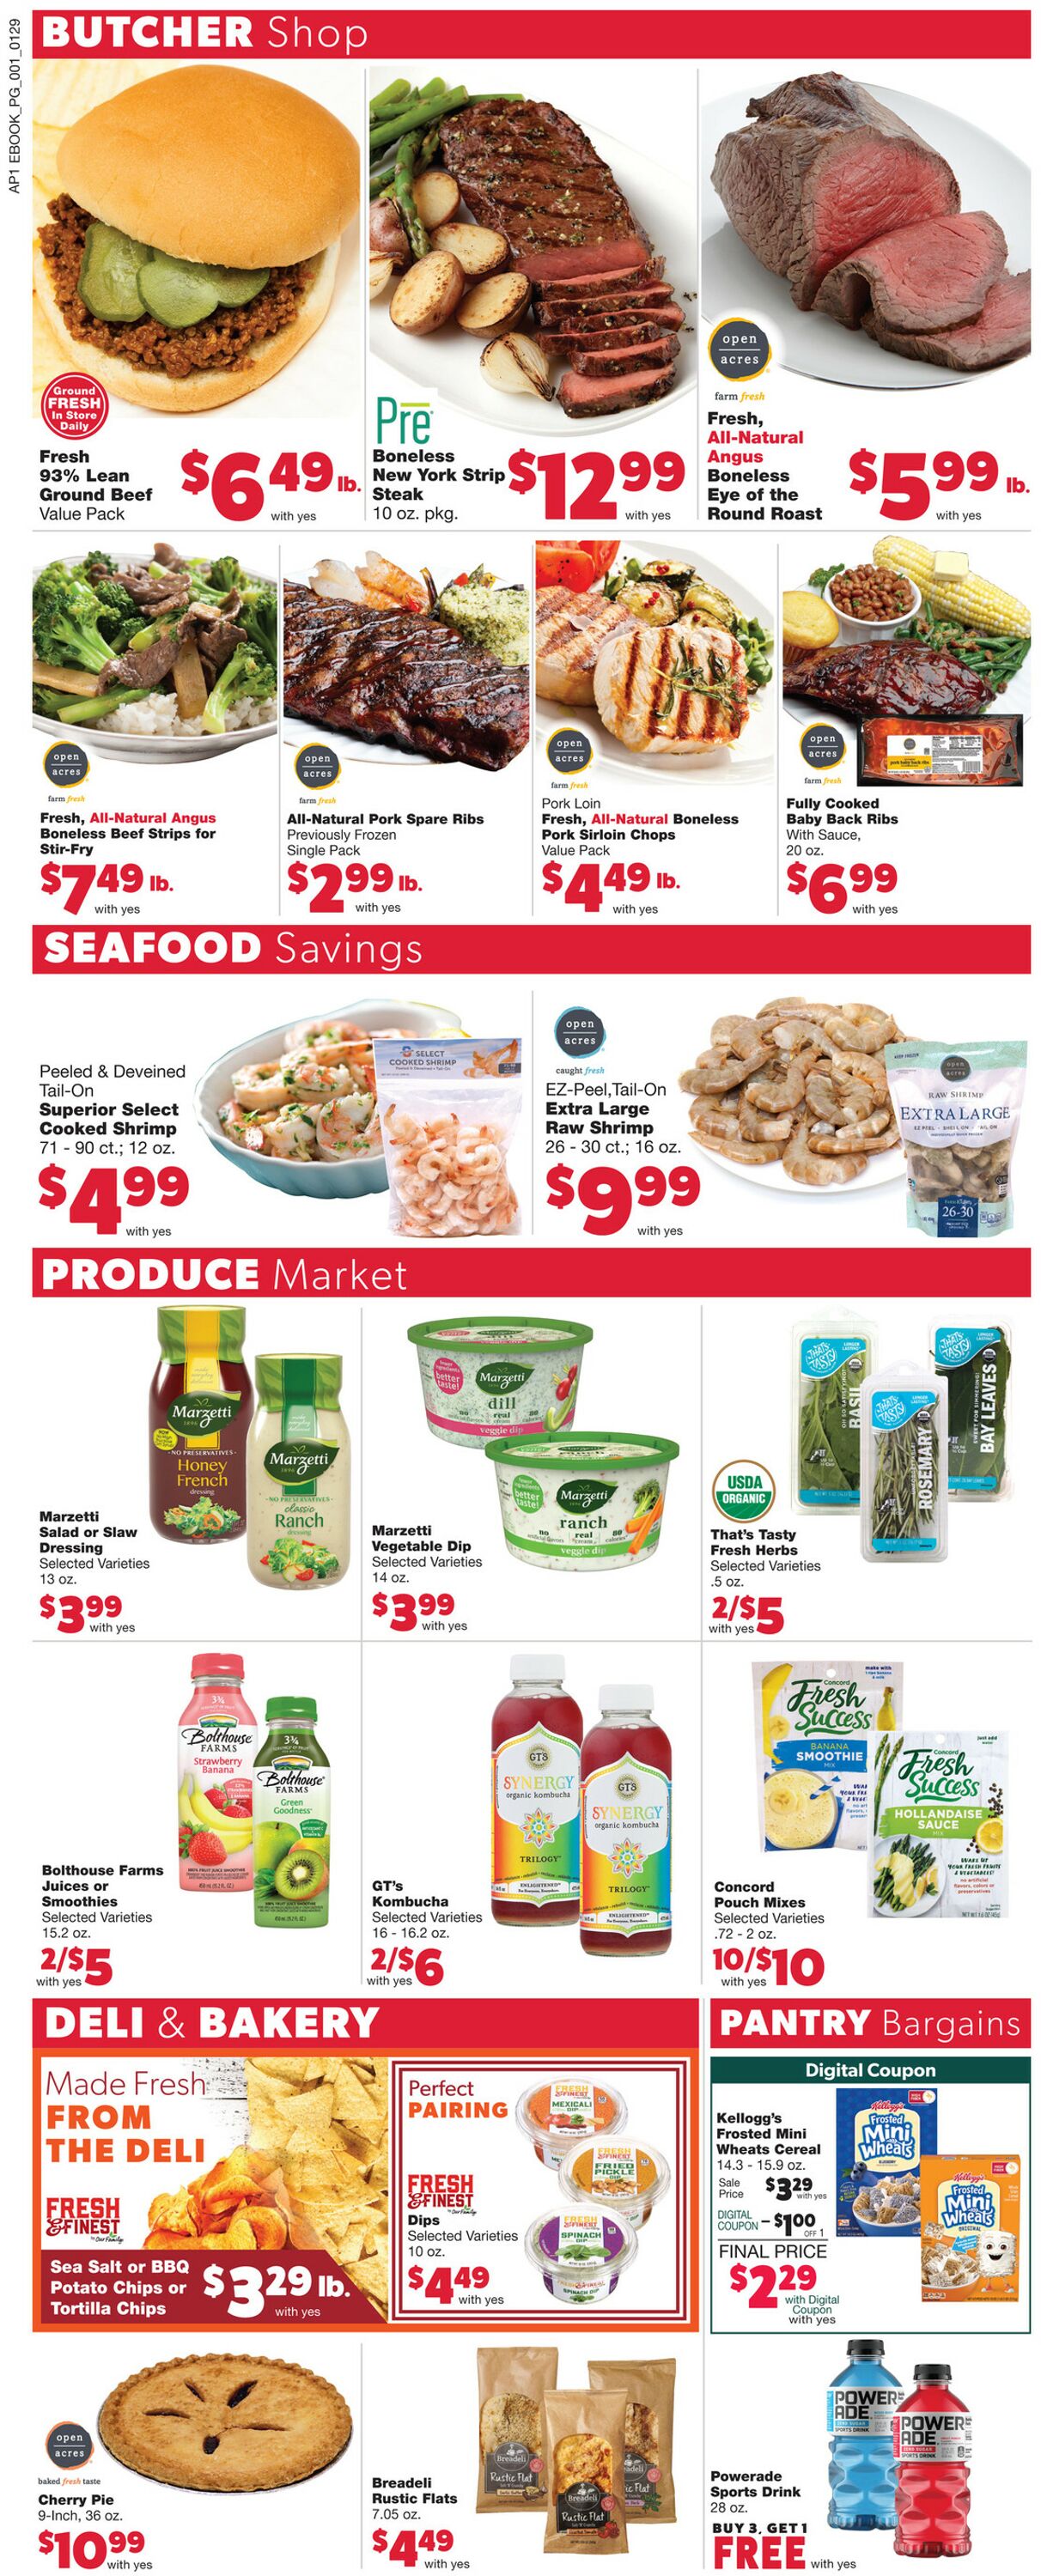 Weekly ad Family Fare 01/29/2023 - 02/04/2023